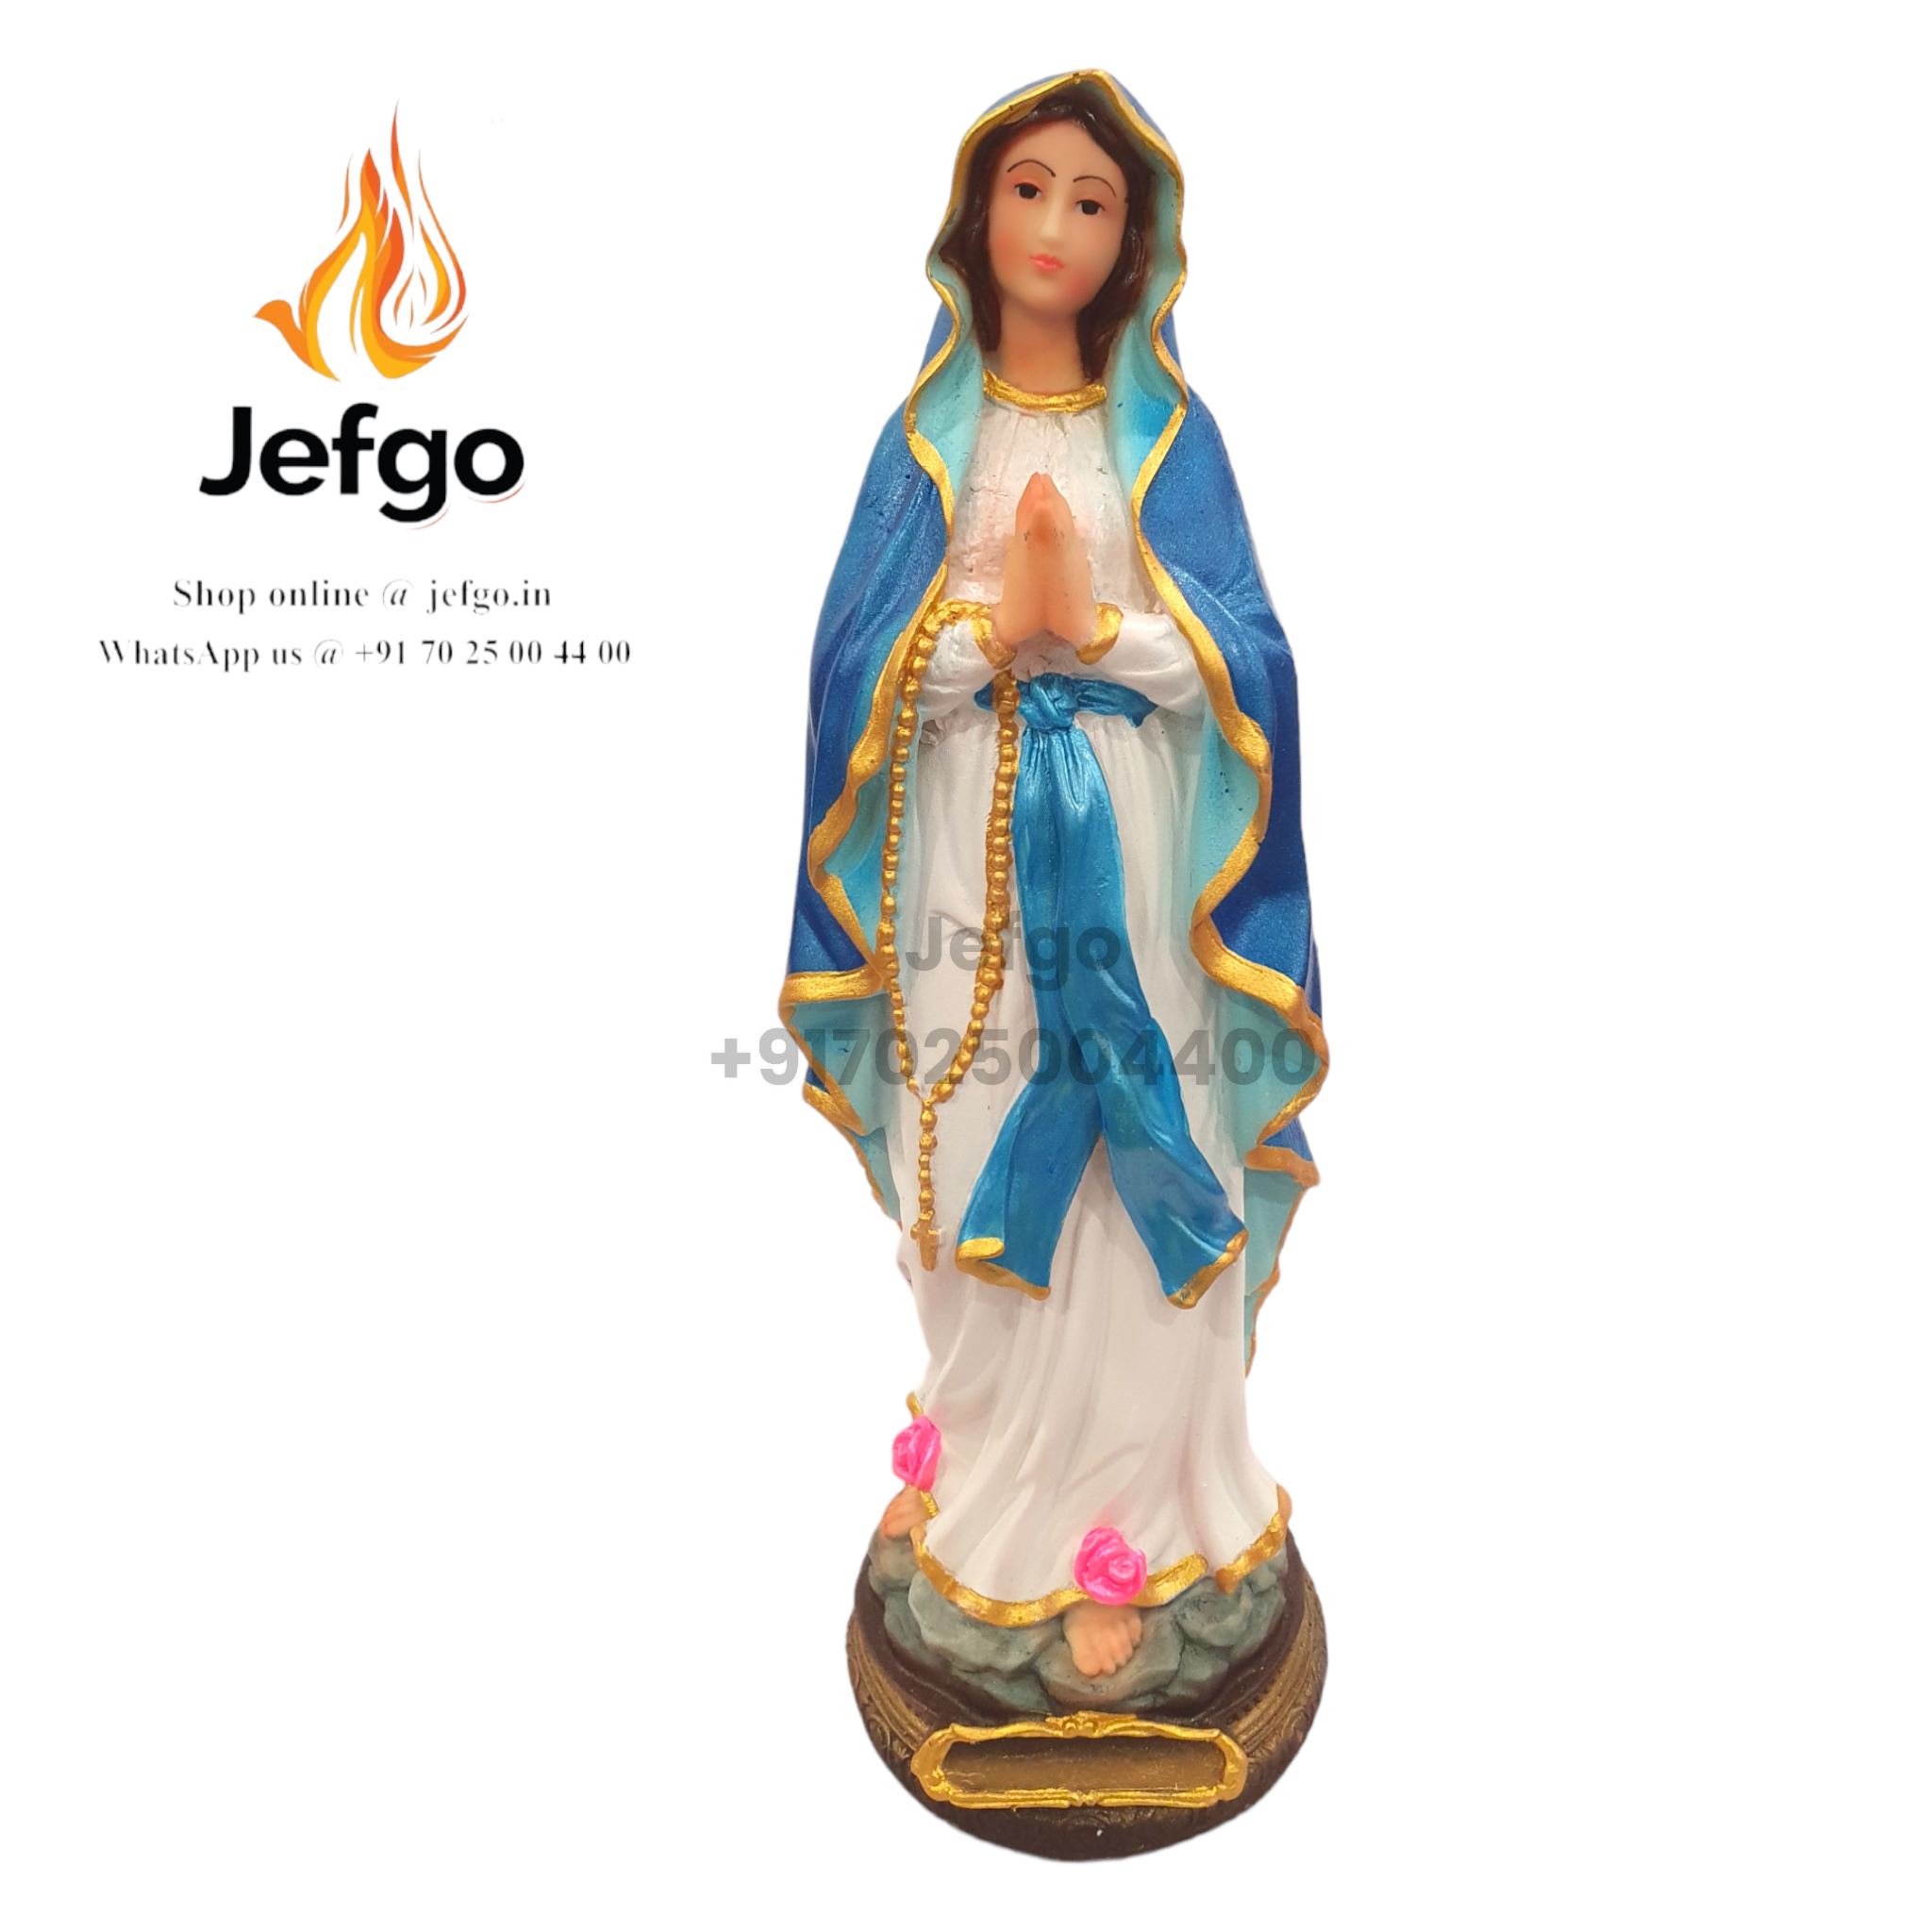   Buy Our lady of Lourdes Statue